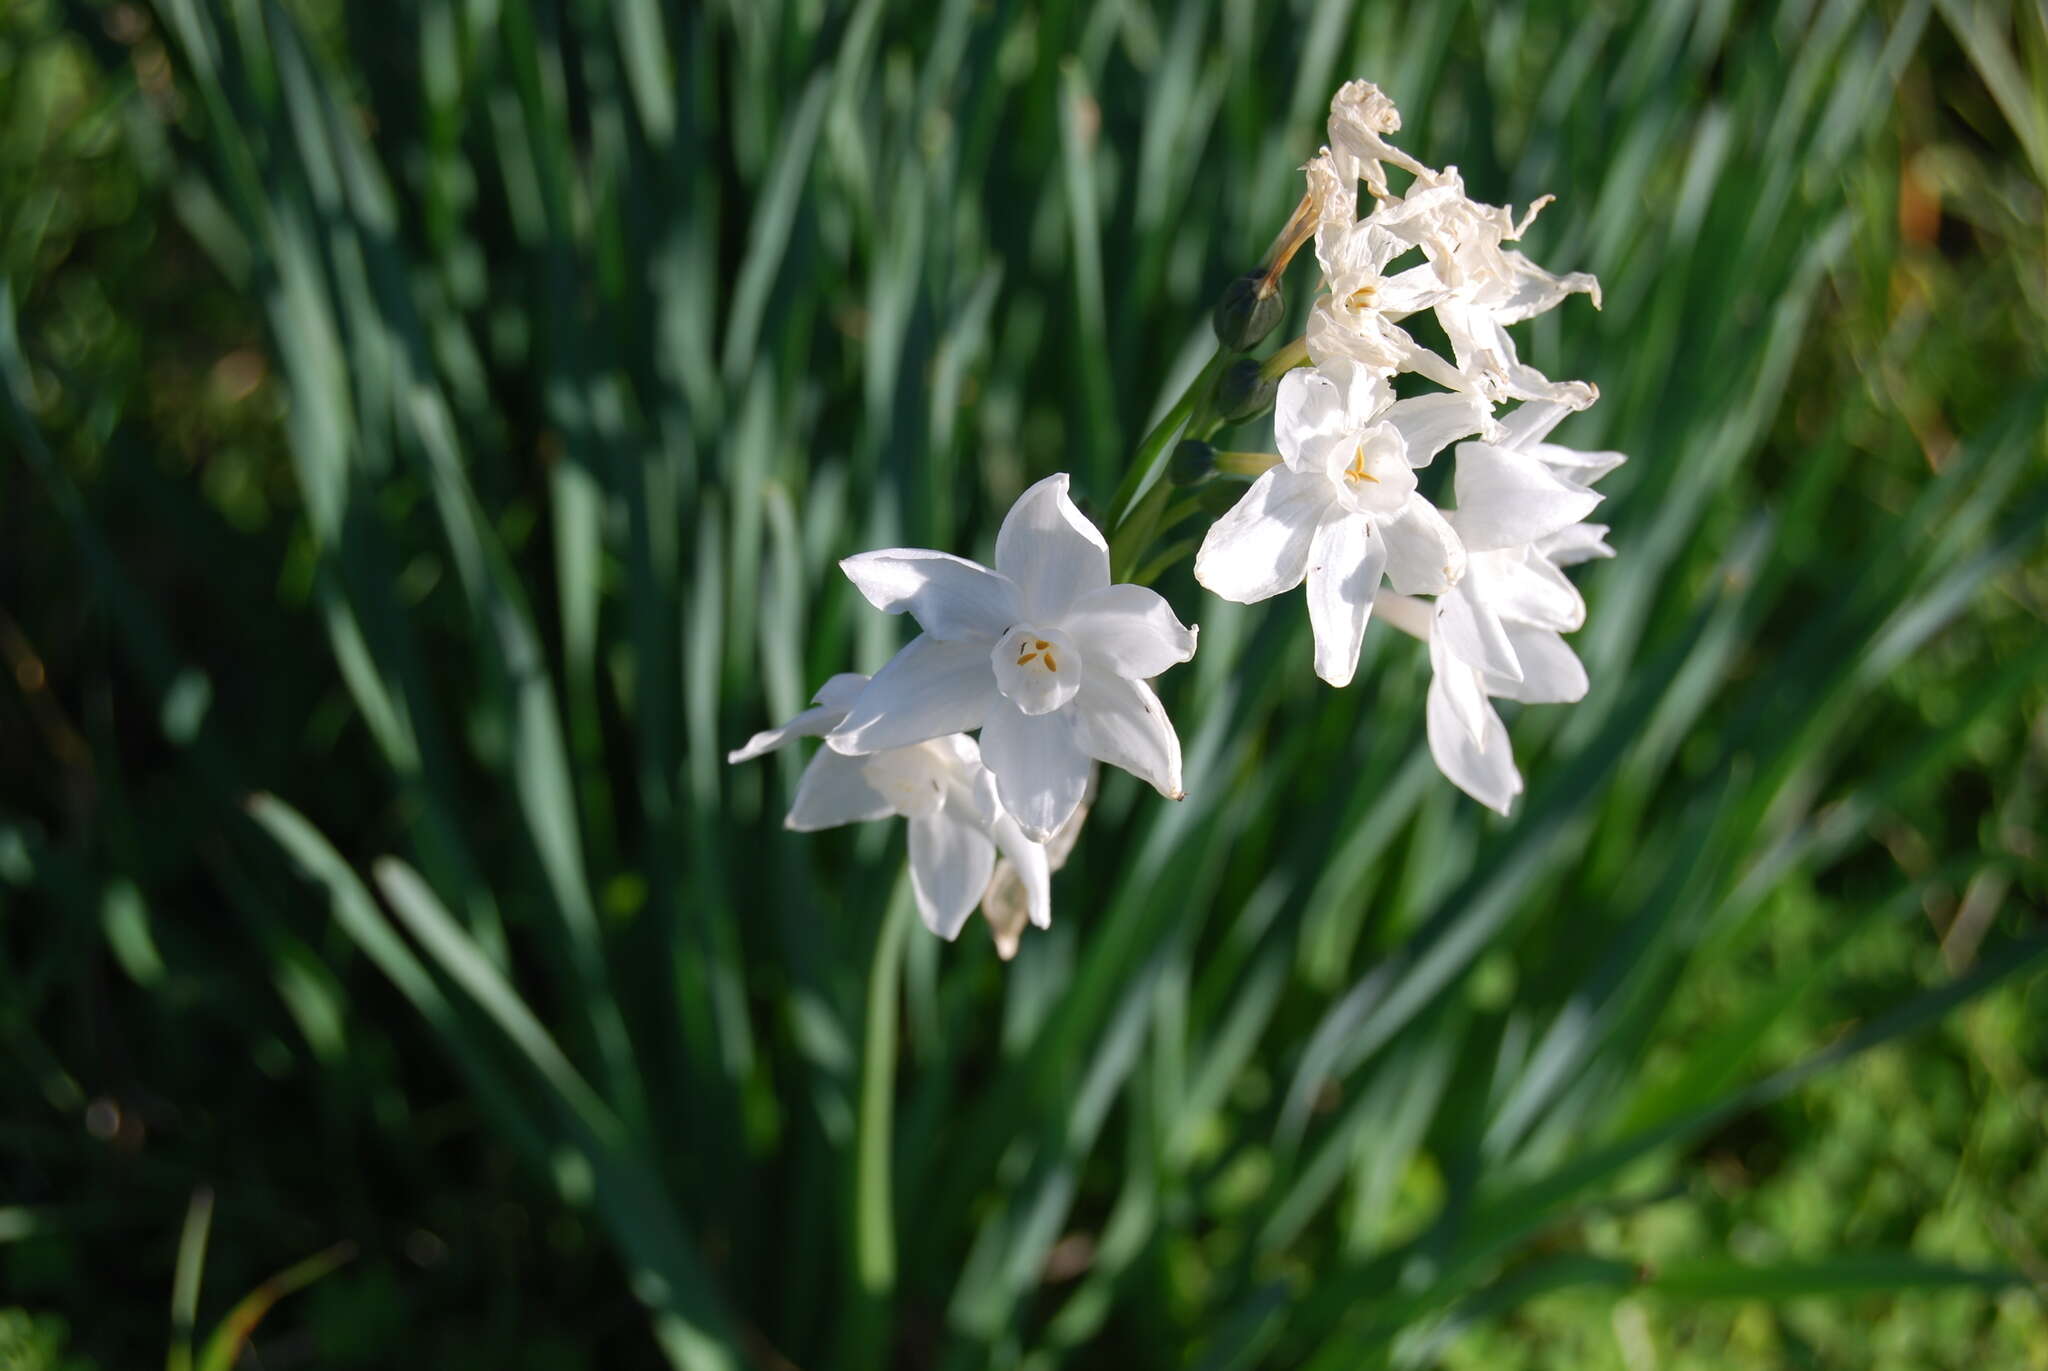 Image of paperwhite narcissus